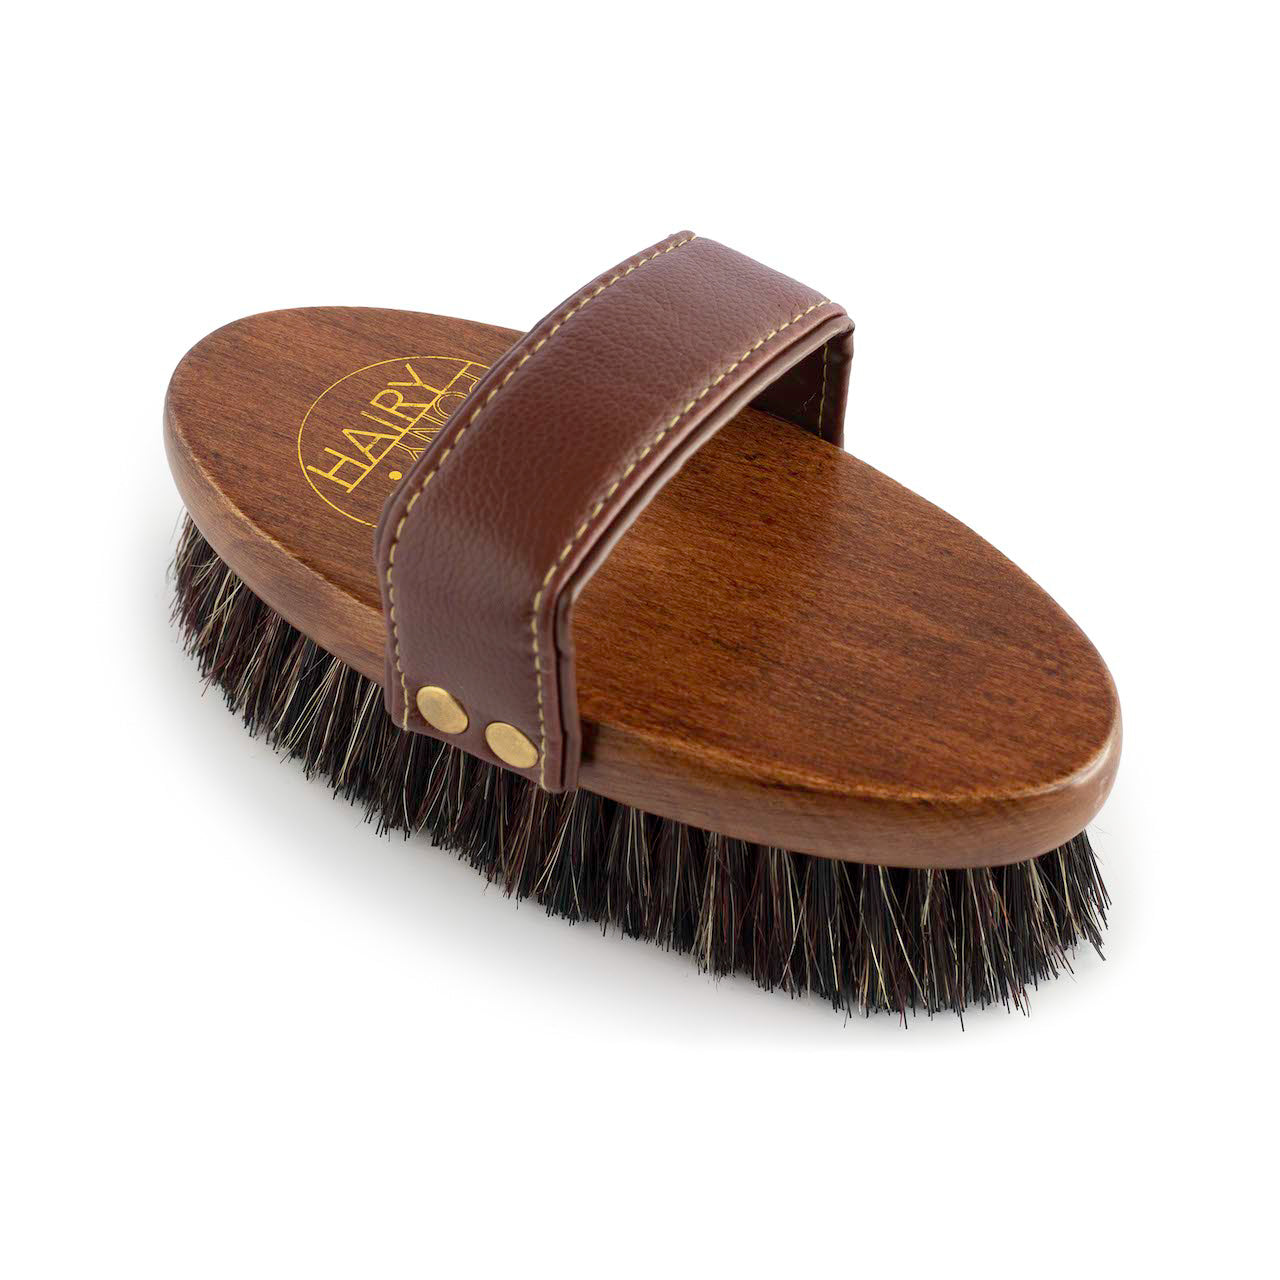 A view of the top of the Hairy Pony Dandy Brush, showing the soft, padded handle, gold detailing and synthetic bristles.